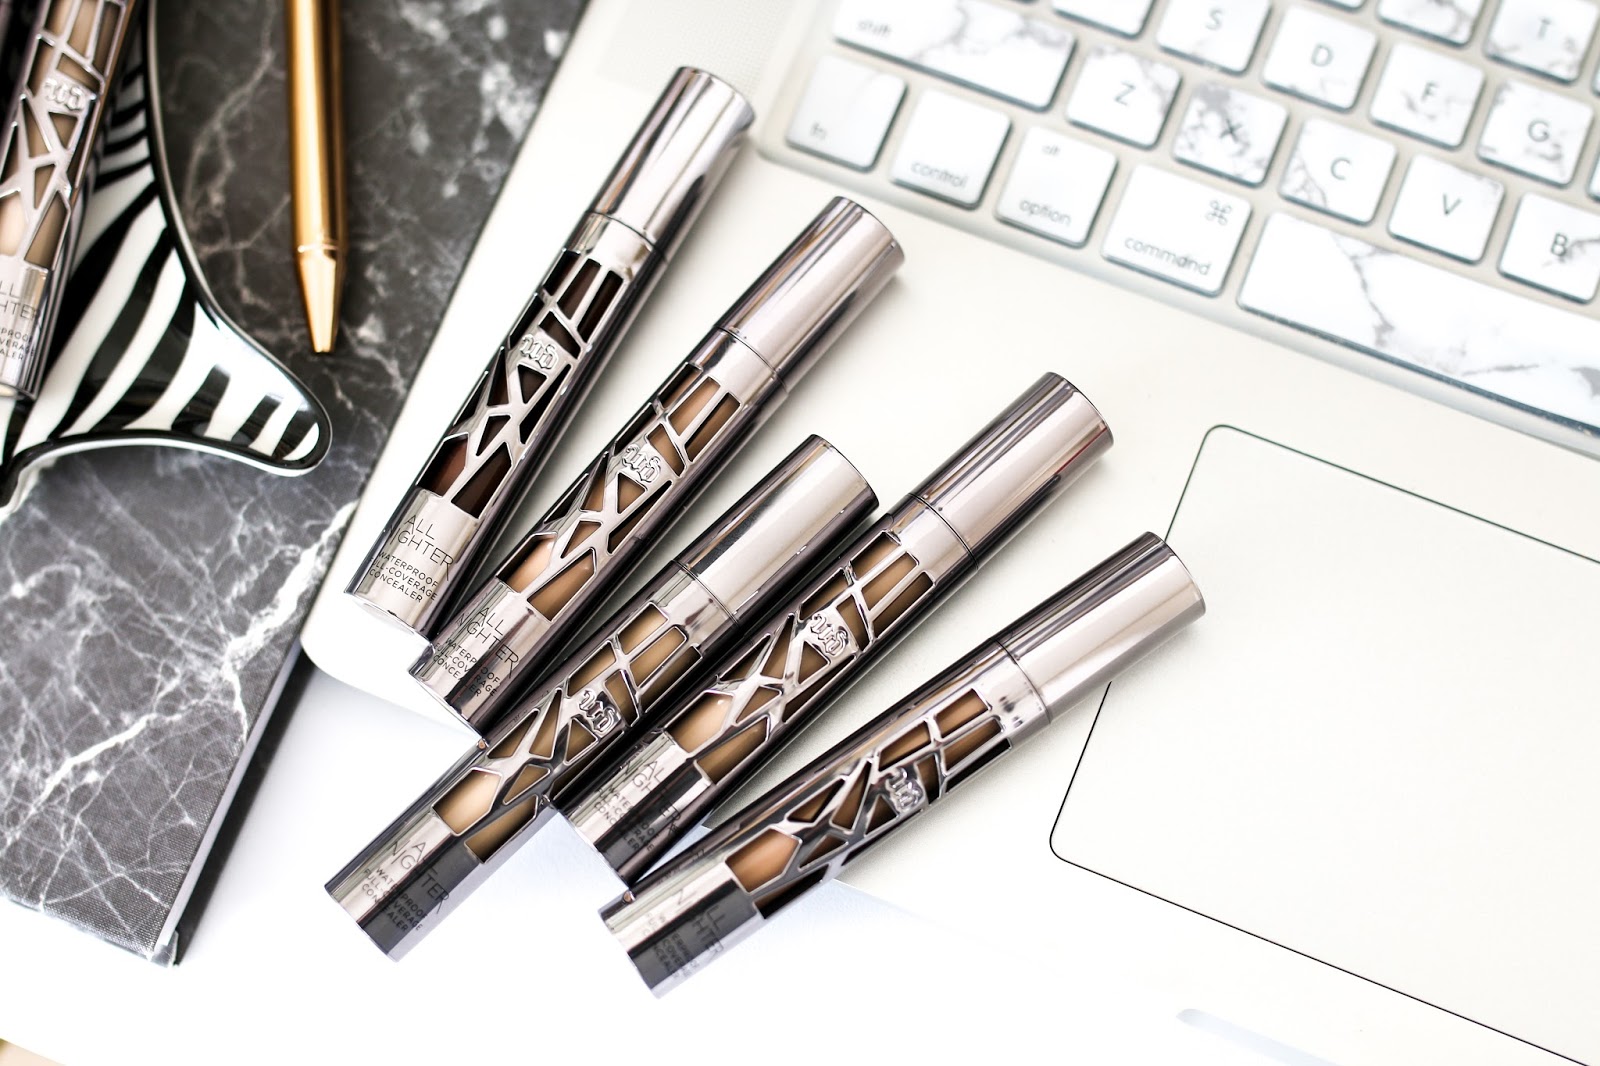 Review: Urban Decay All Nighter Waterproof Concealer with Swatches of Every Shade